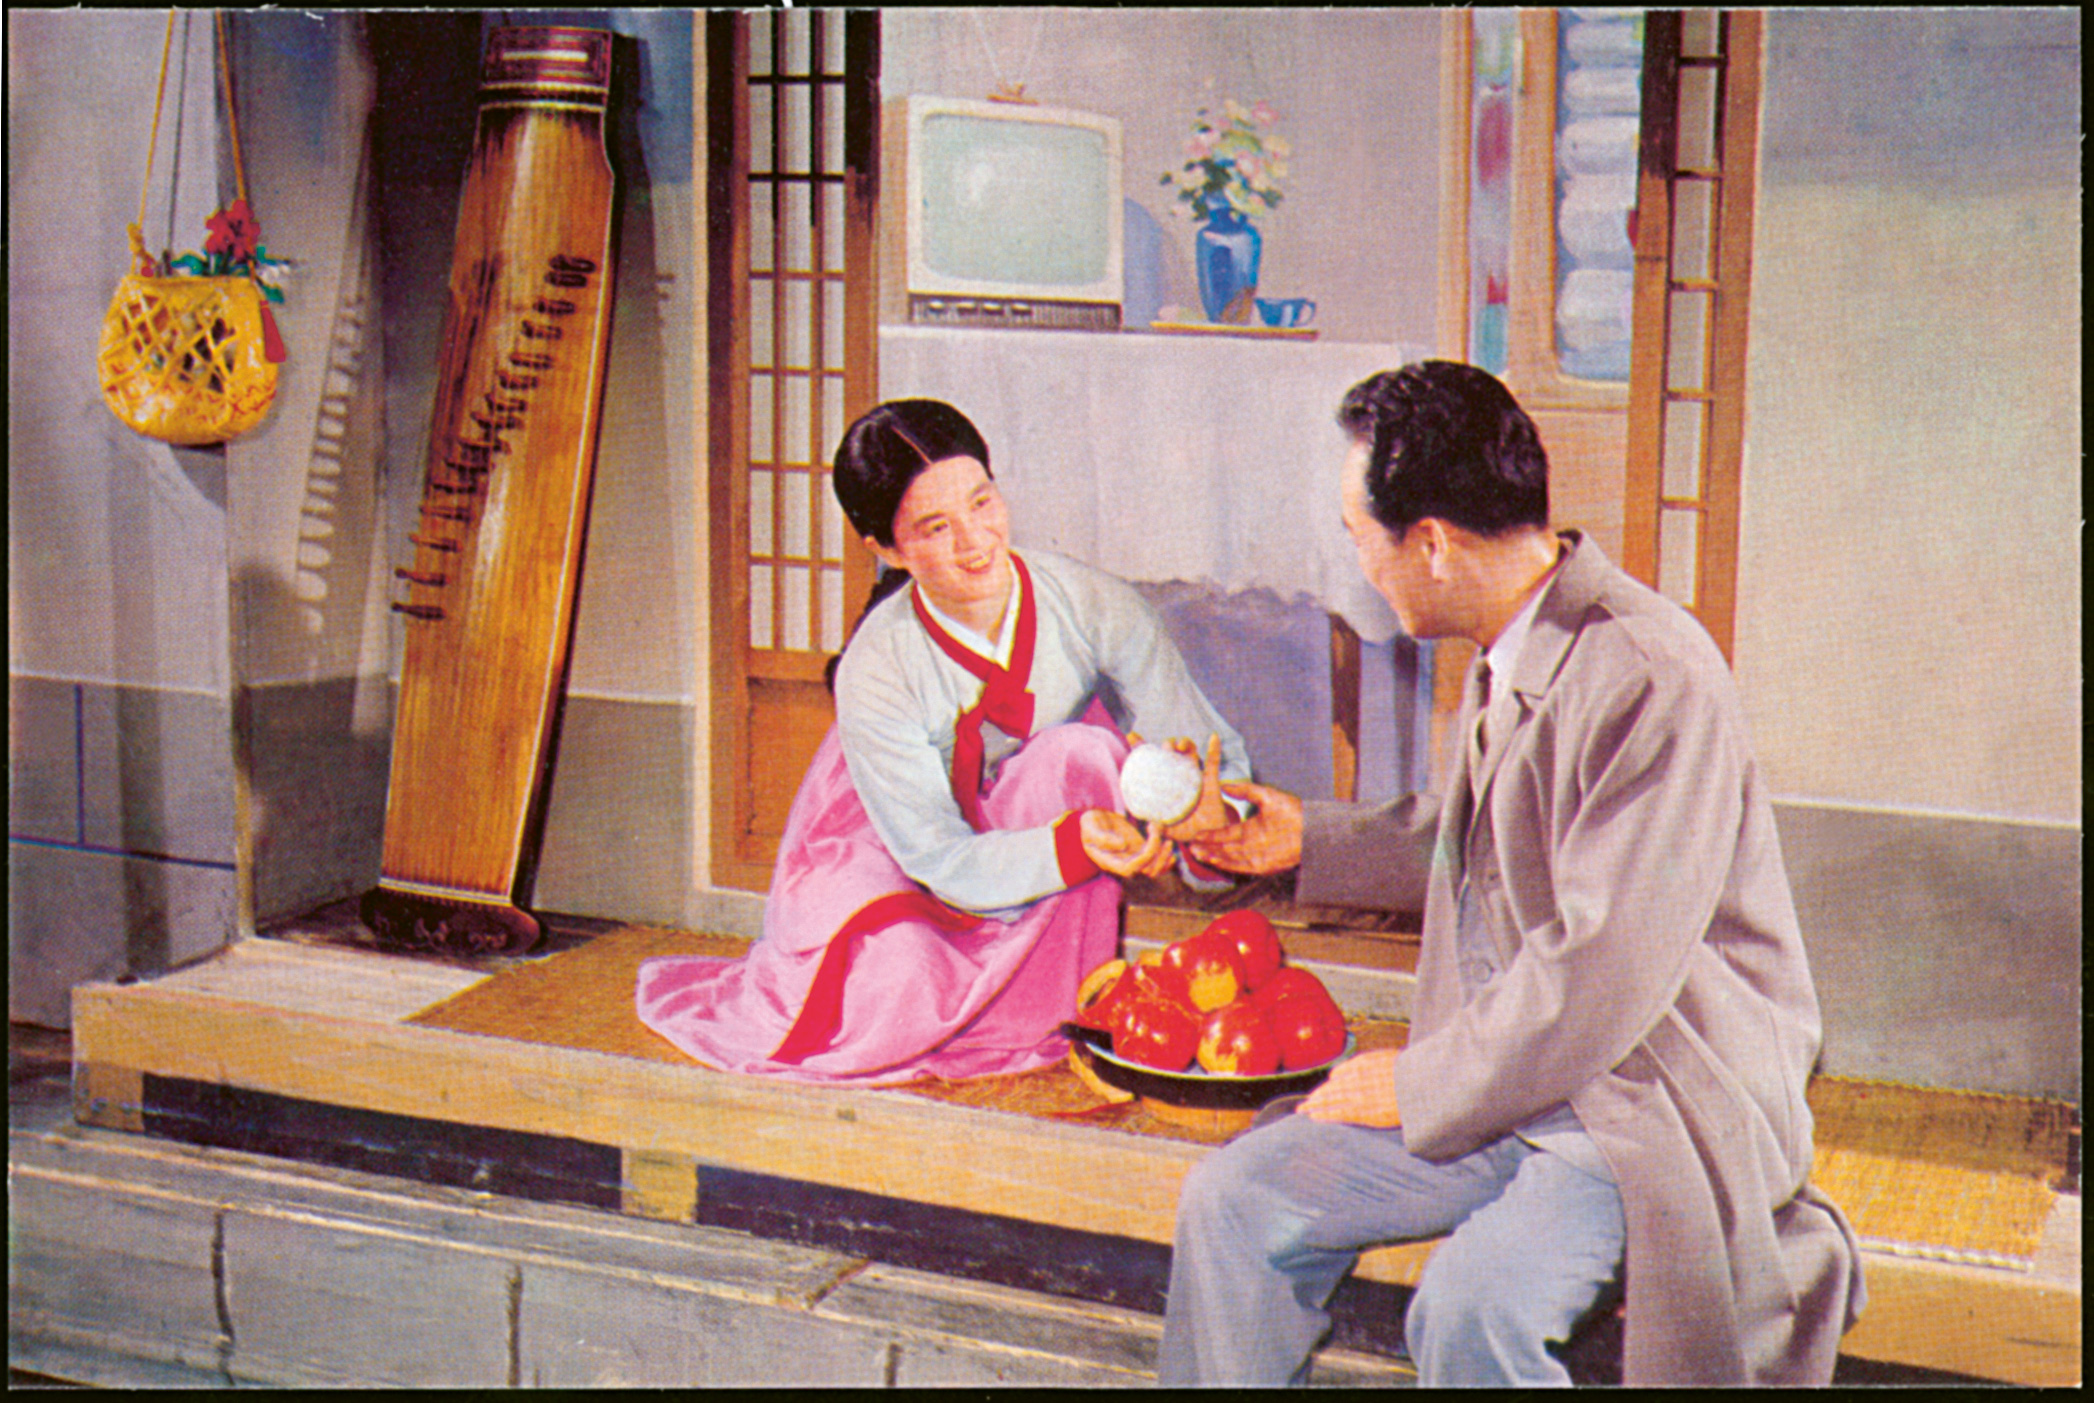 A 1973 postcard depicting scenes from the revolutionary opera Song of Mount Gumgang-san, as reproduced in Made in North Korea